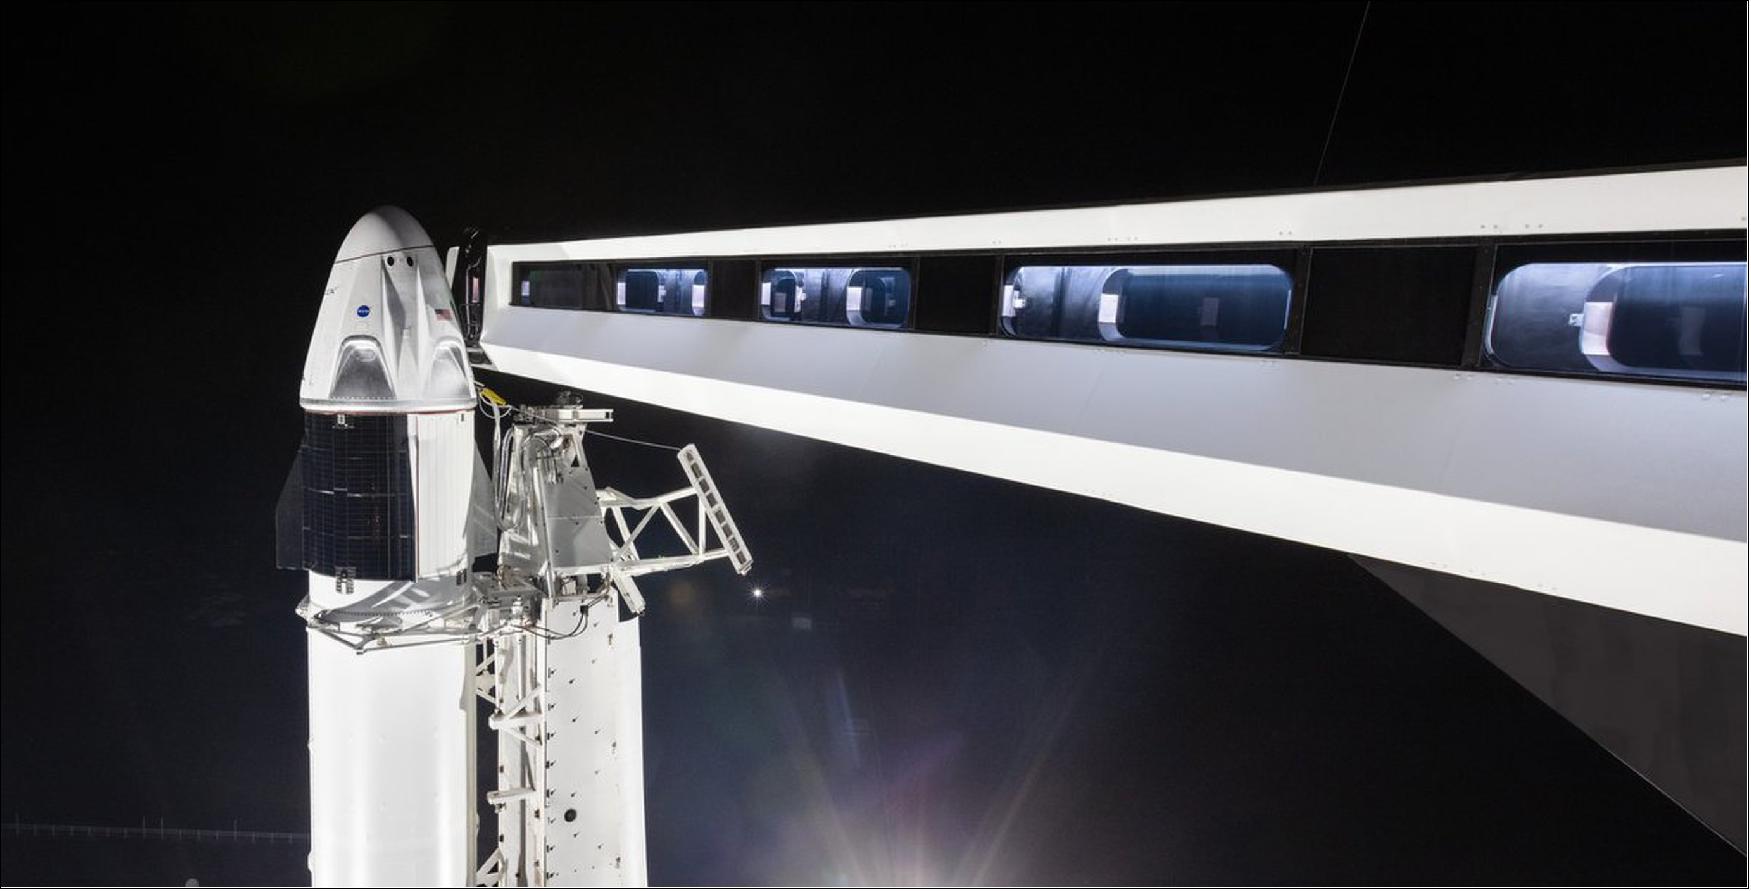 Figure 29: A crew access arm reaches toward SpaceX's first Crew Dragon spacecraft atop its Falcon 9 rocket on Launch Pad 39A of NASA's Kennedy Space Center in Cape Canaveral, Florida on Jan. 3, 2019 ahead of an uncrewed test flight (image credit: SpaceX)